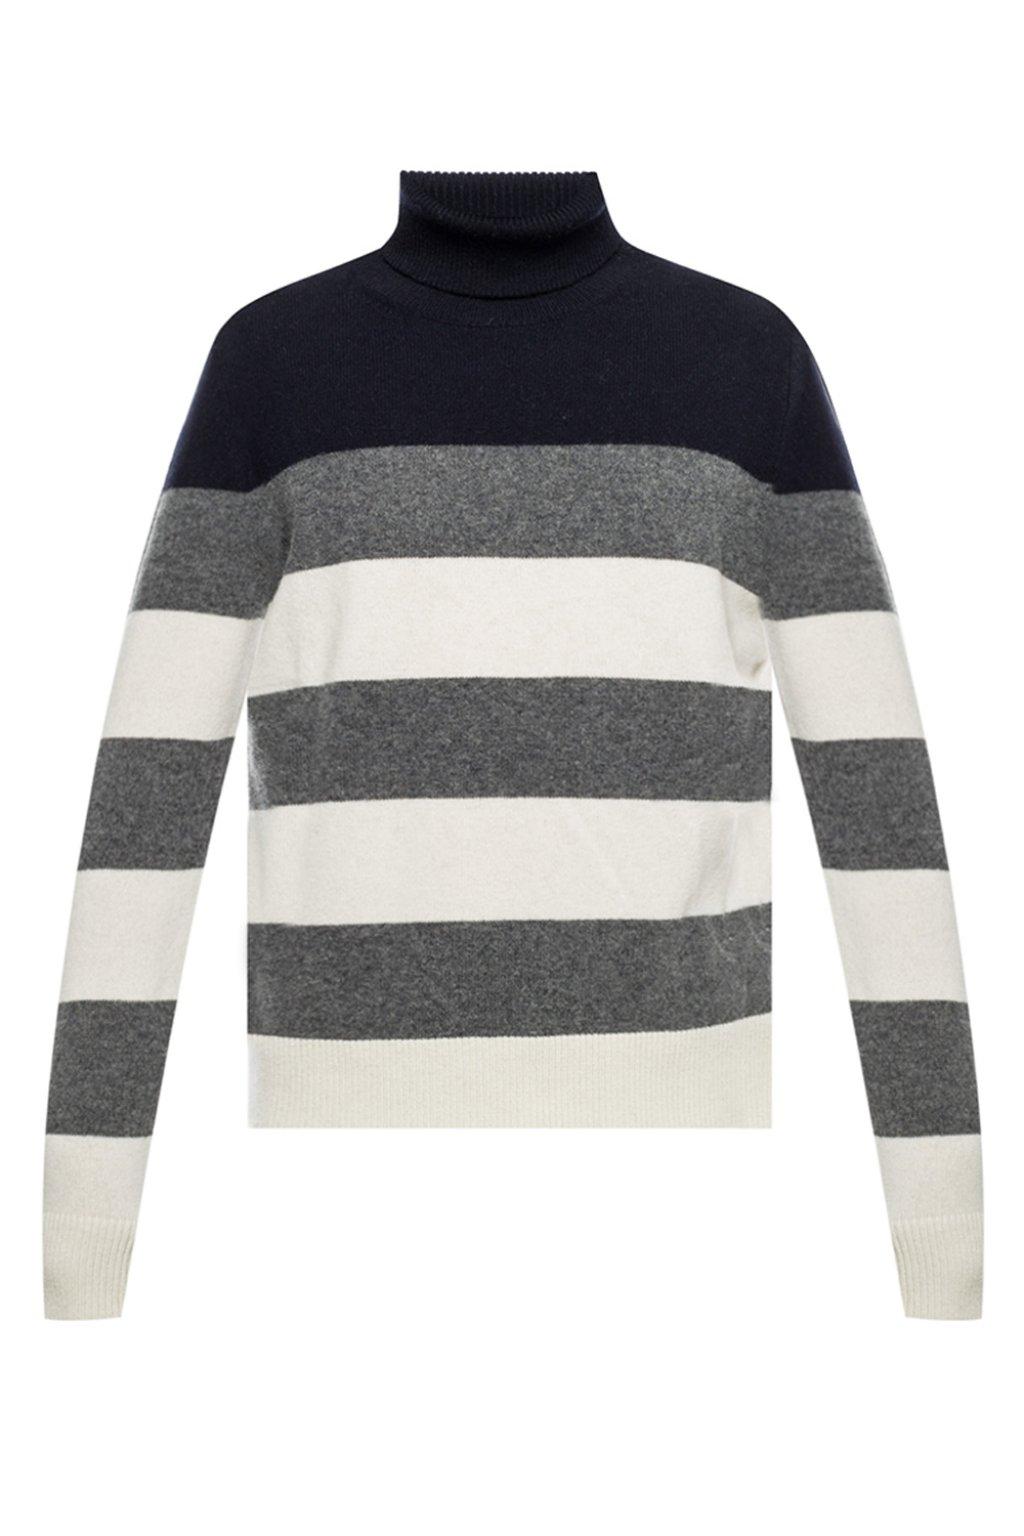 Moncler Wool Striped Turtleneck Sweater in Cream (Gray) for Men - Save